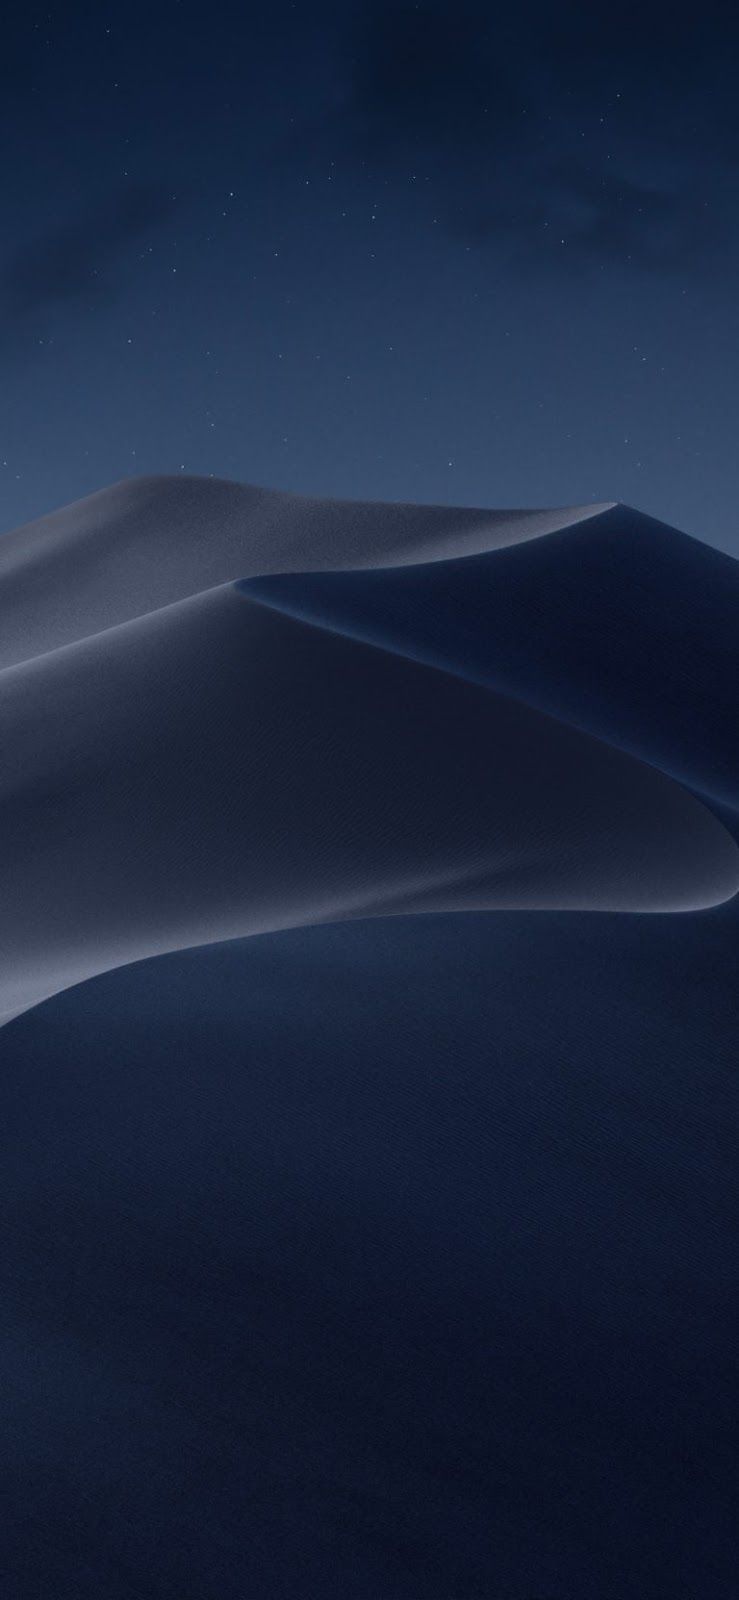 Download The macOS 10.14 Mojave Light & Dark Wallpaper For Your iOS Devices. Mkbhd wallpaper, Dark wallpaper, Ios wallpaper